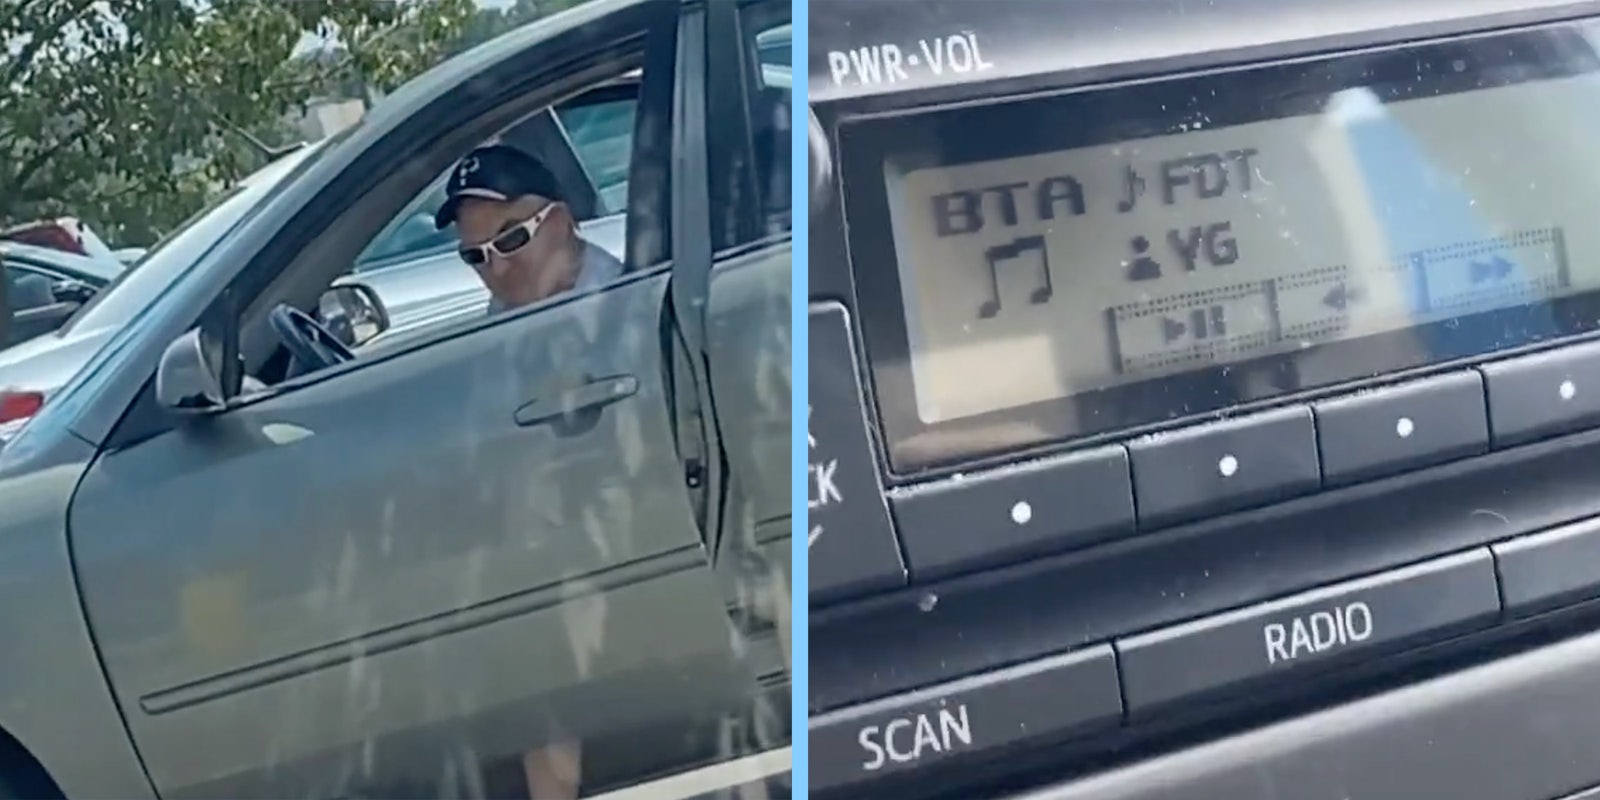 A man in a car (L) and a car stereo (R).